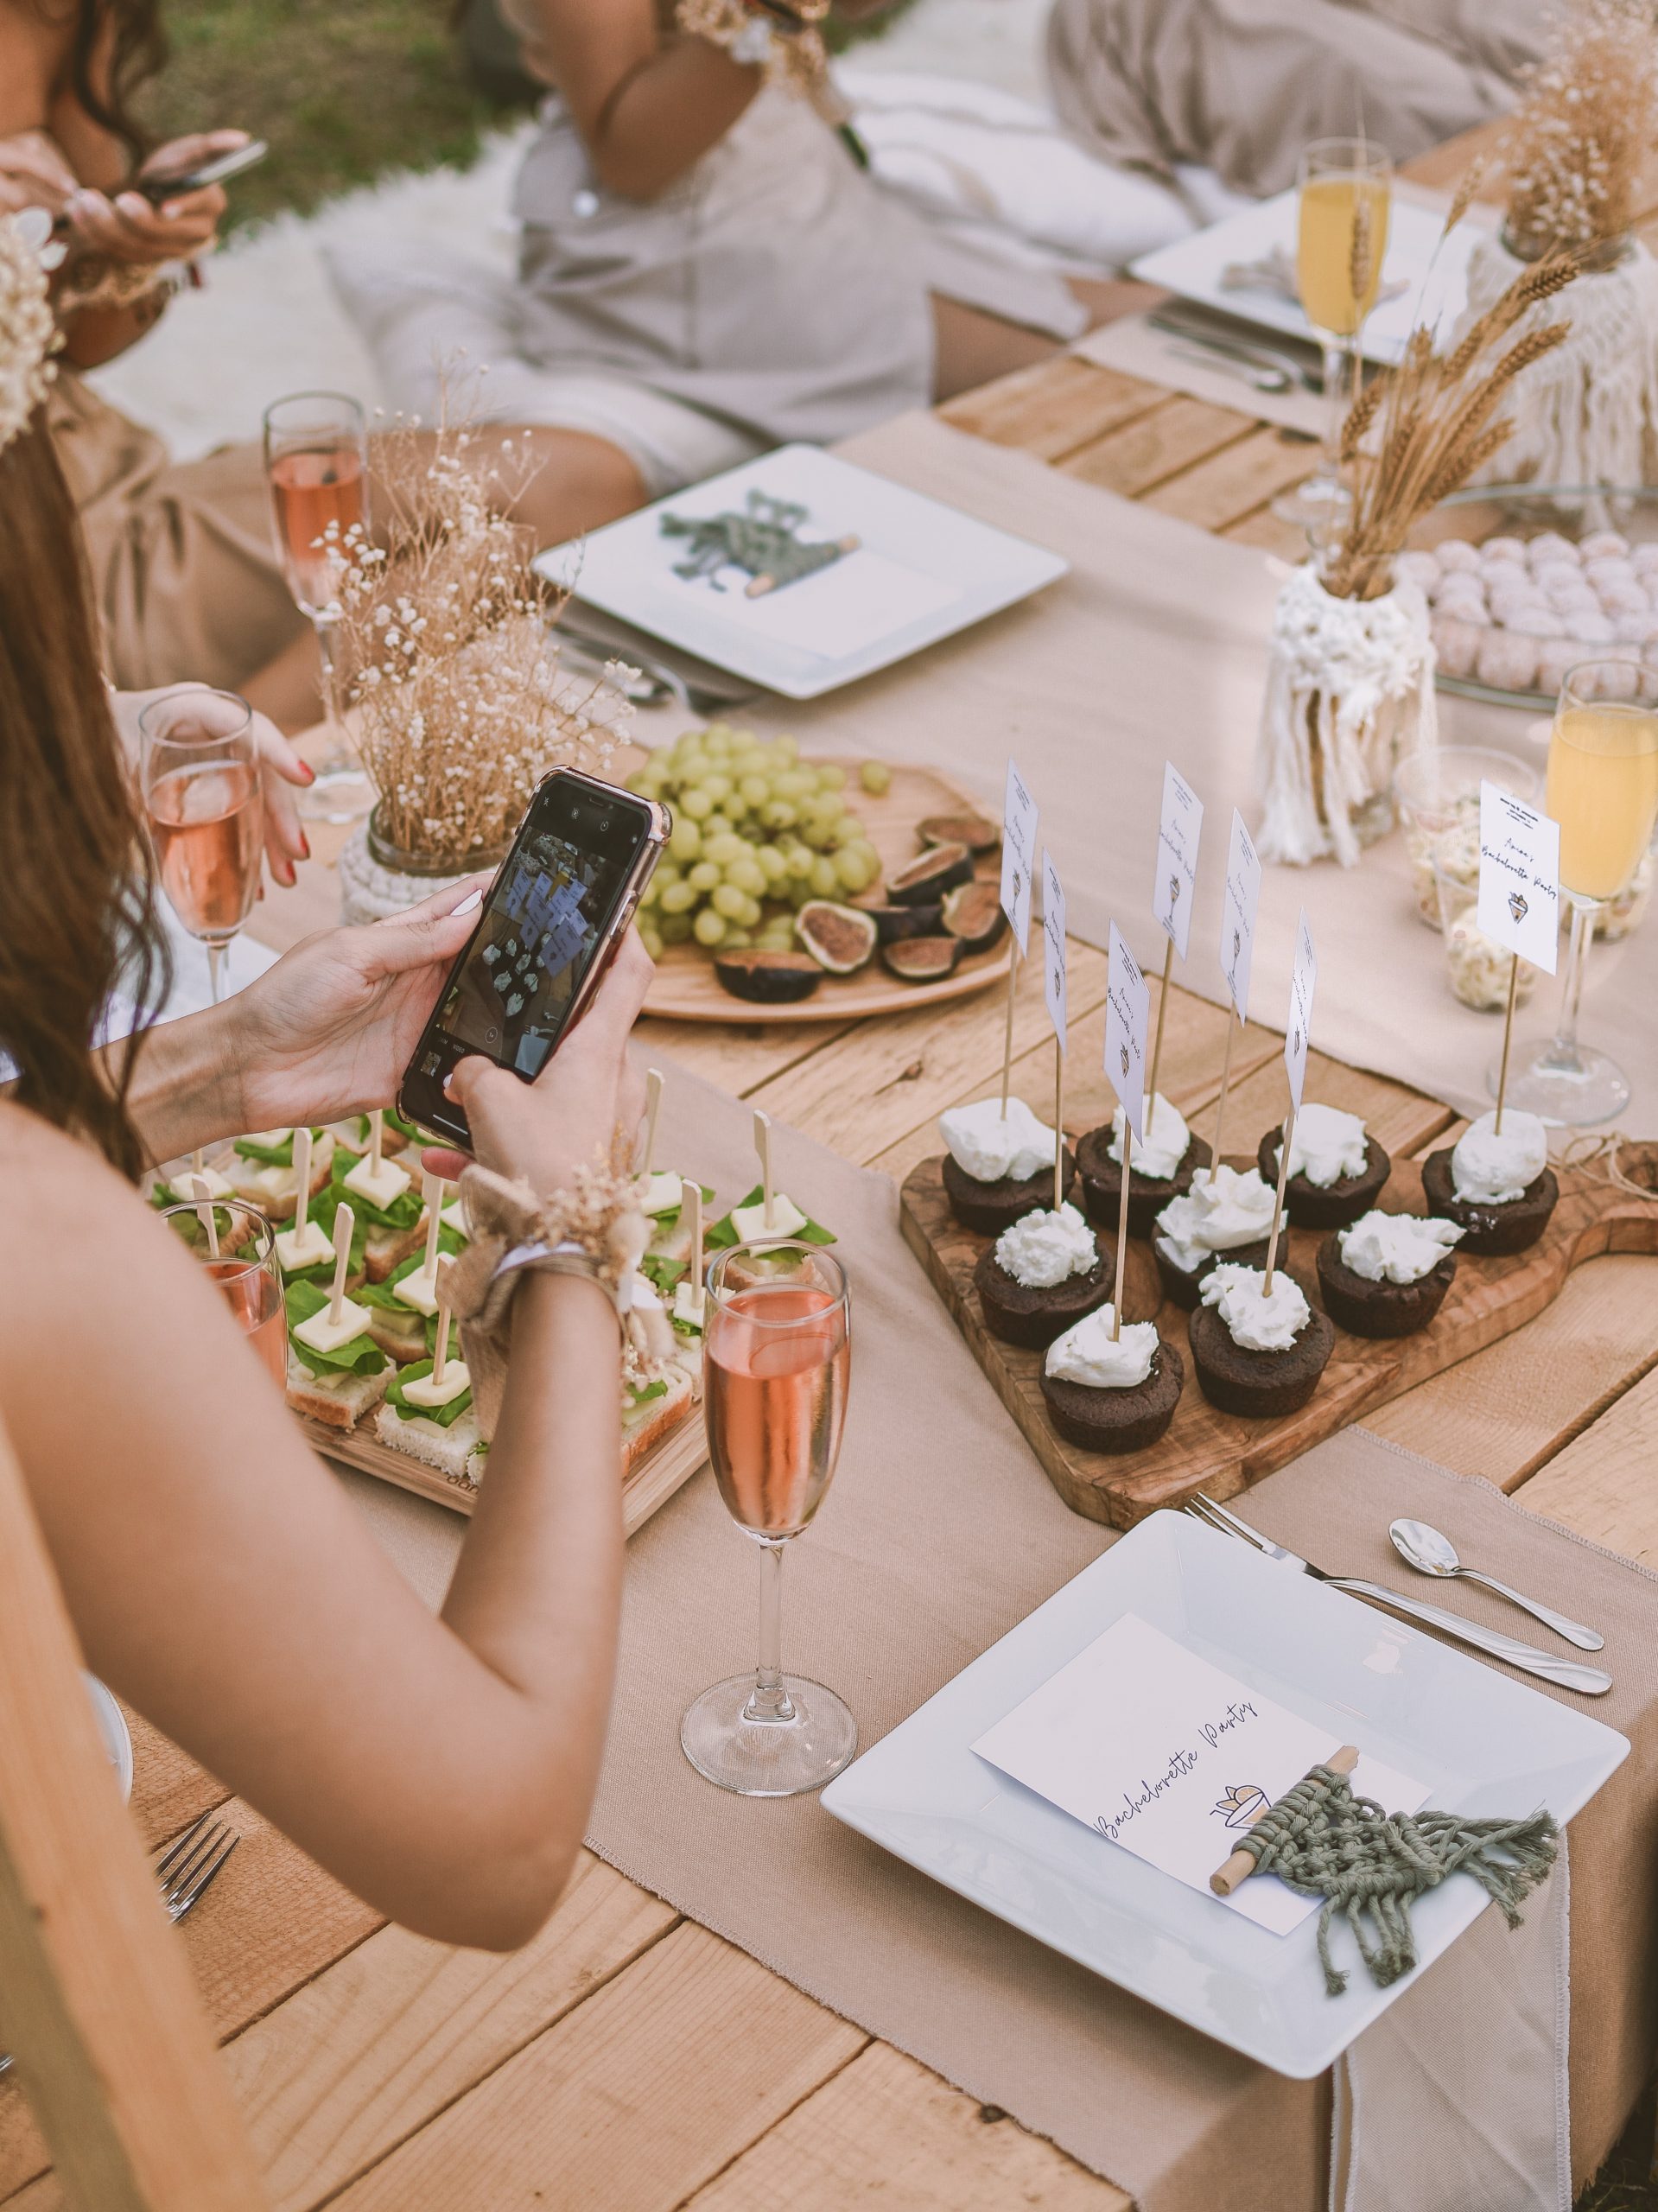 A woman taking a picture of the food at a table at a party